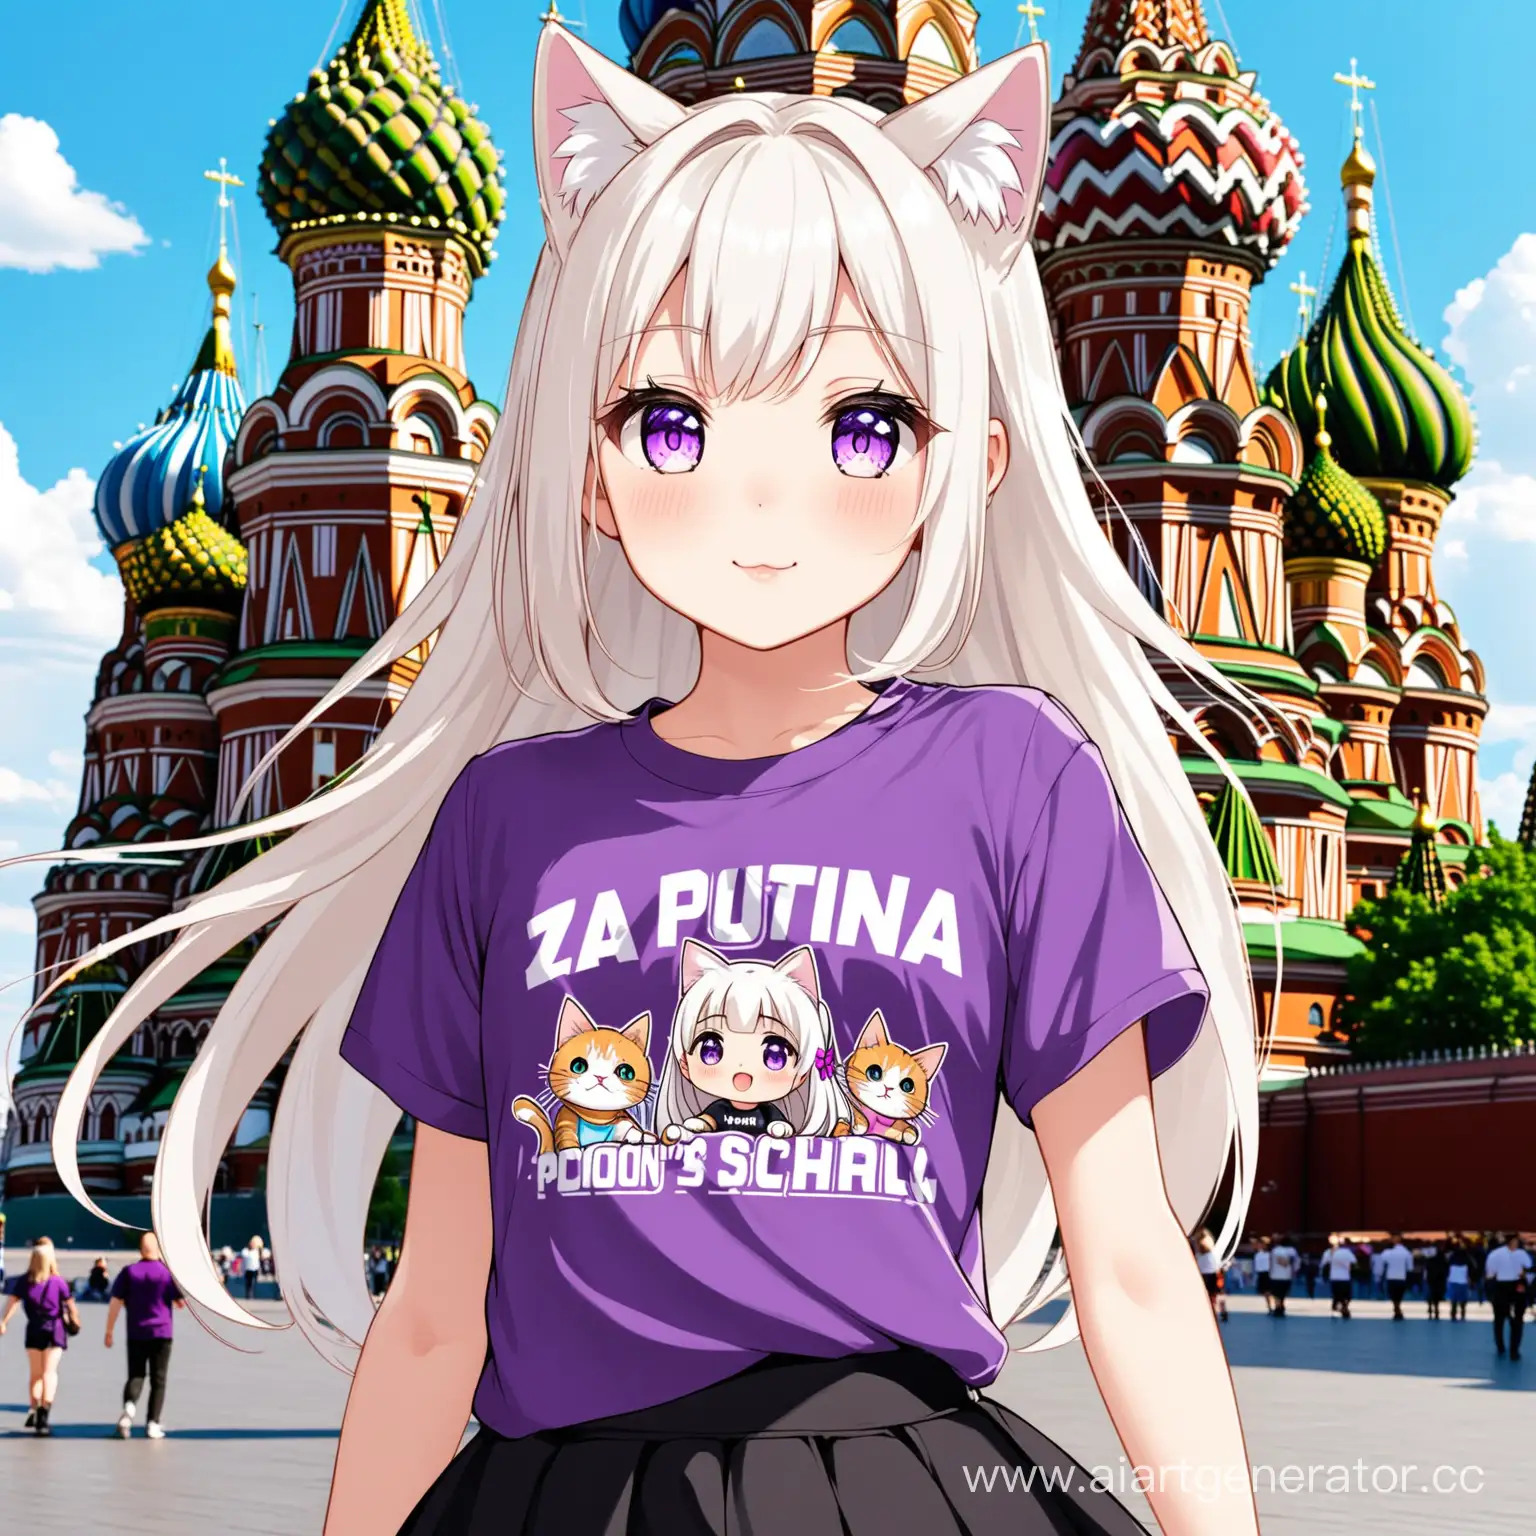 loli, long white hair, cat ears, black skirt, purple T-shirt, with the text ‘Za Putina’ on T-shirt, St. Basil's Cathedral on background